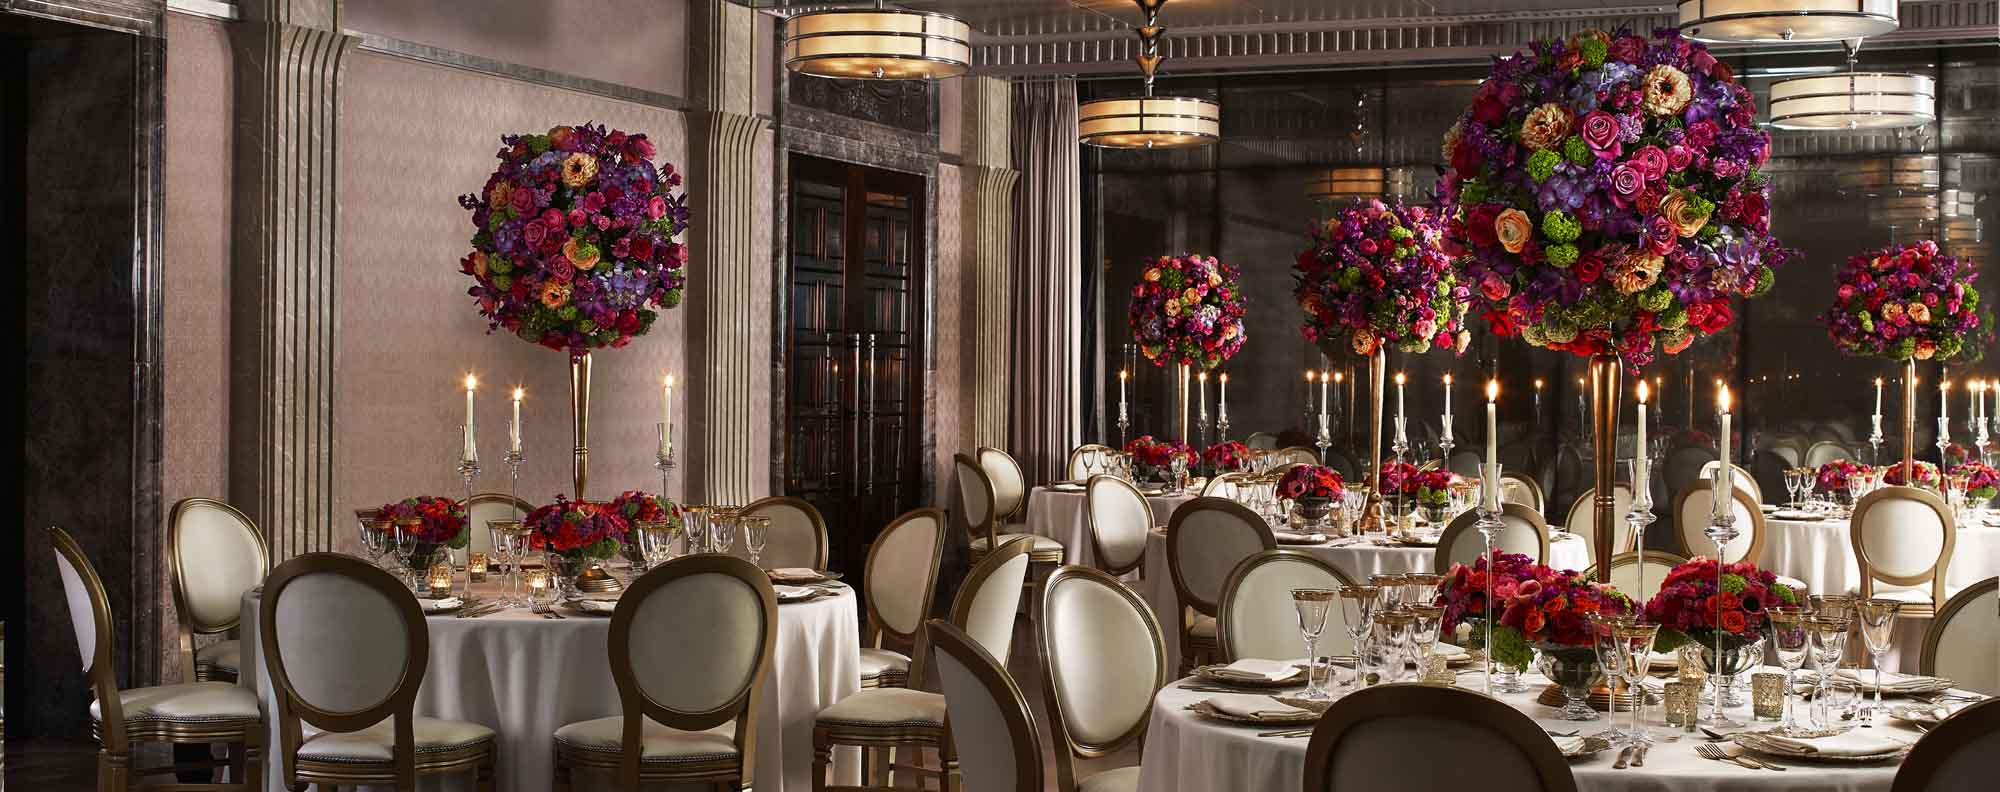 Large round tables with white seats and colourful decorative flowers in the Mayfair Room.